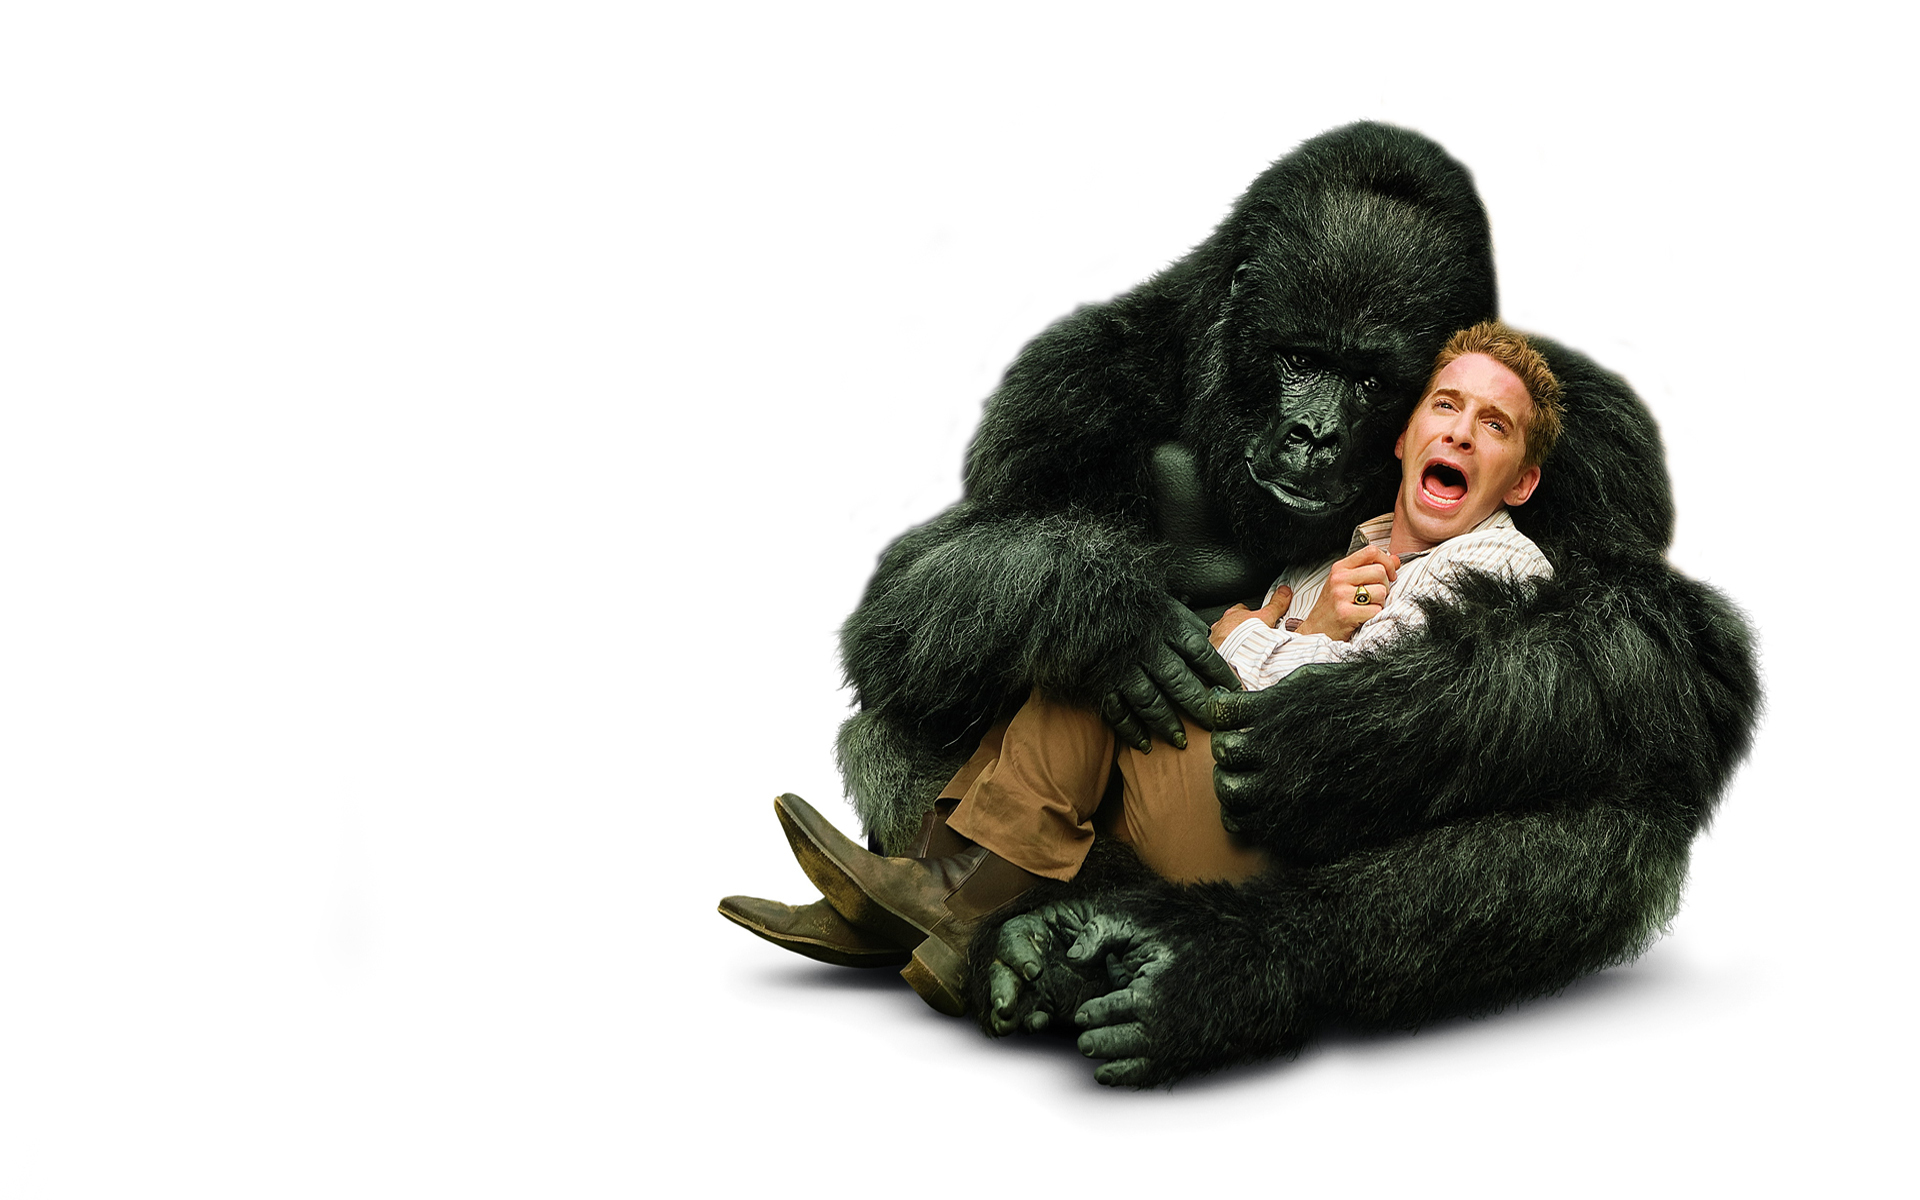 old dogs, Seth green, Comedies, Humor, Funny, Movies, Entertainment, Animals, Gorillas, People, Men, Males, Primates Wallpaper